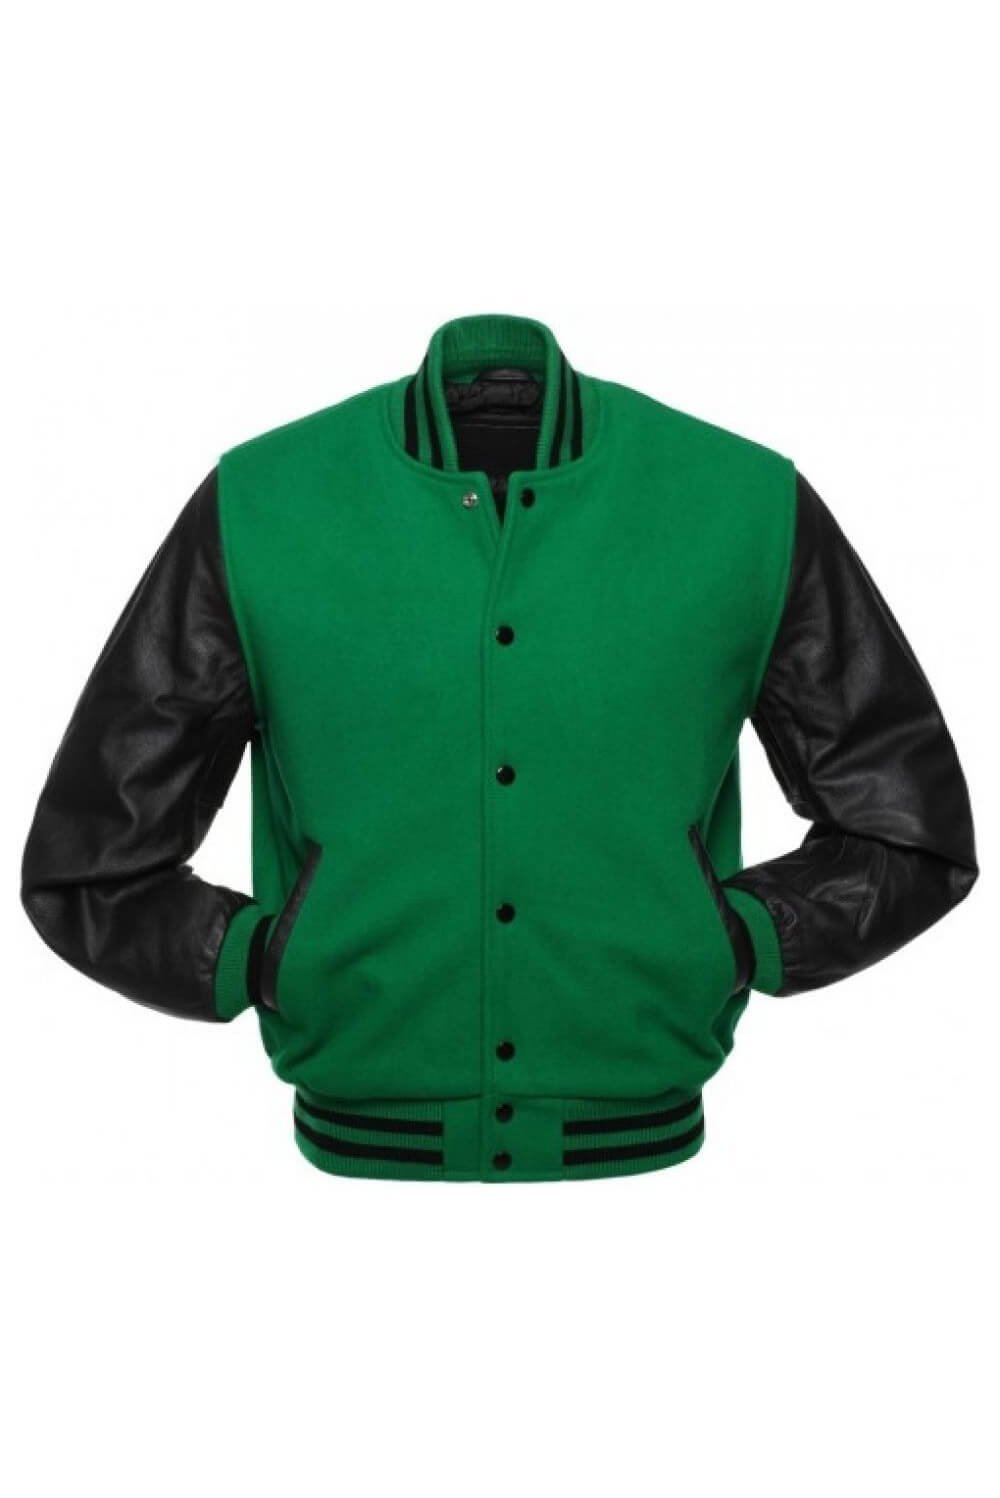 Kelly Green Letterman Jacket with Black Leather Sleeves